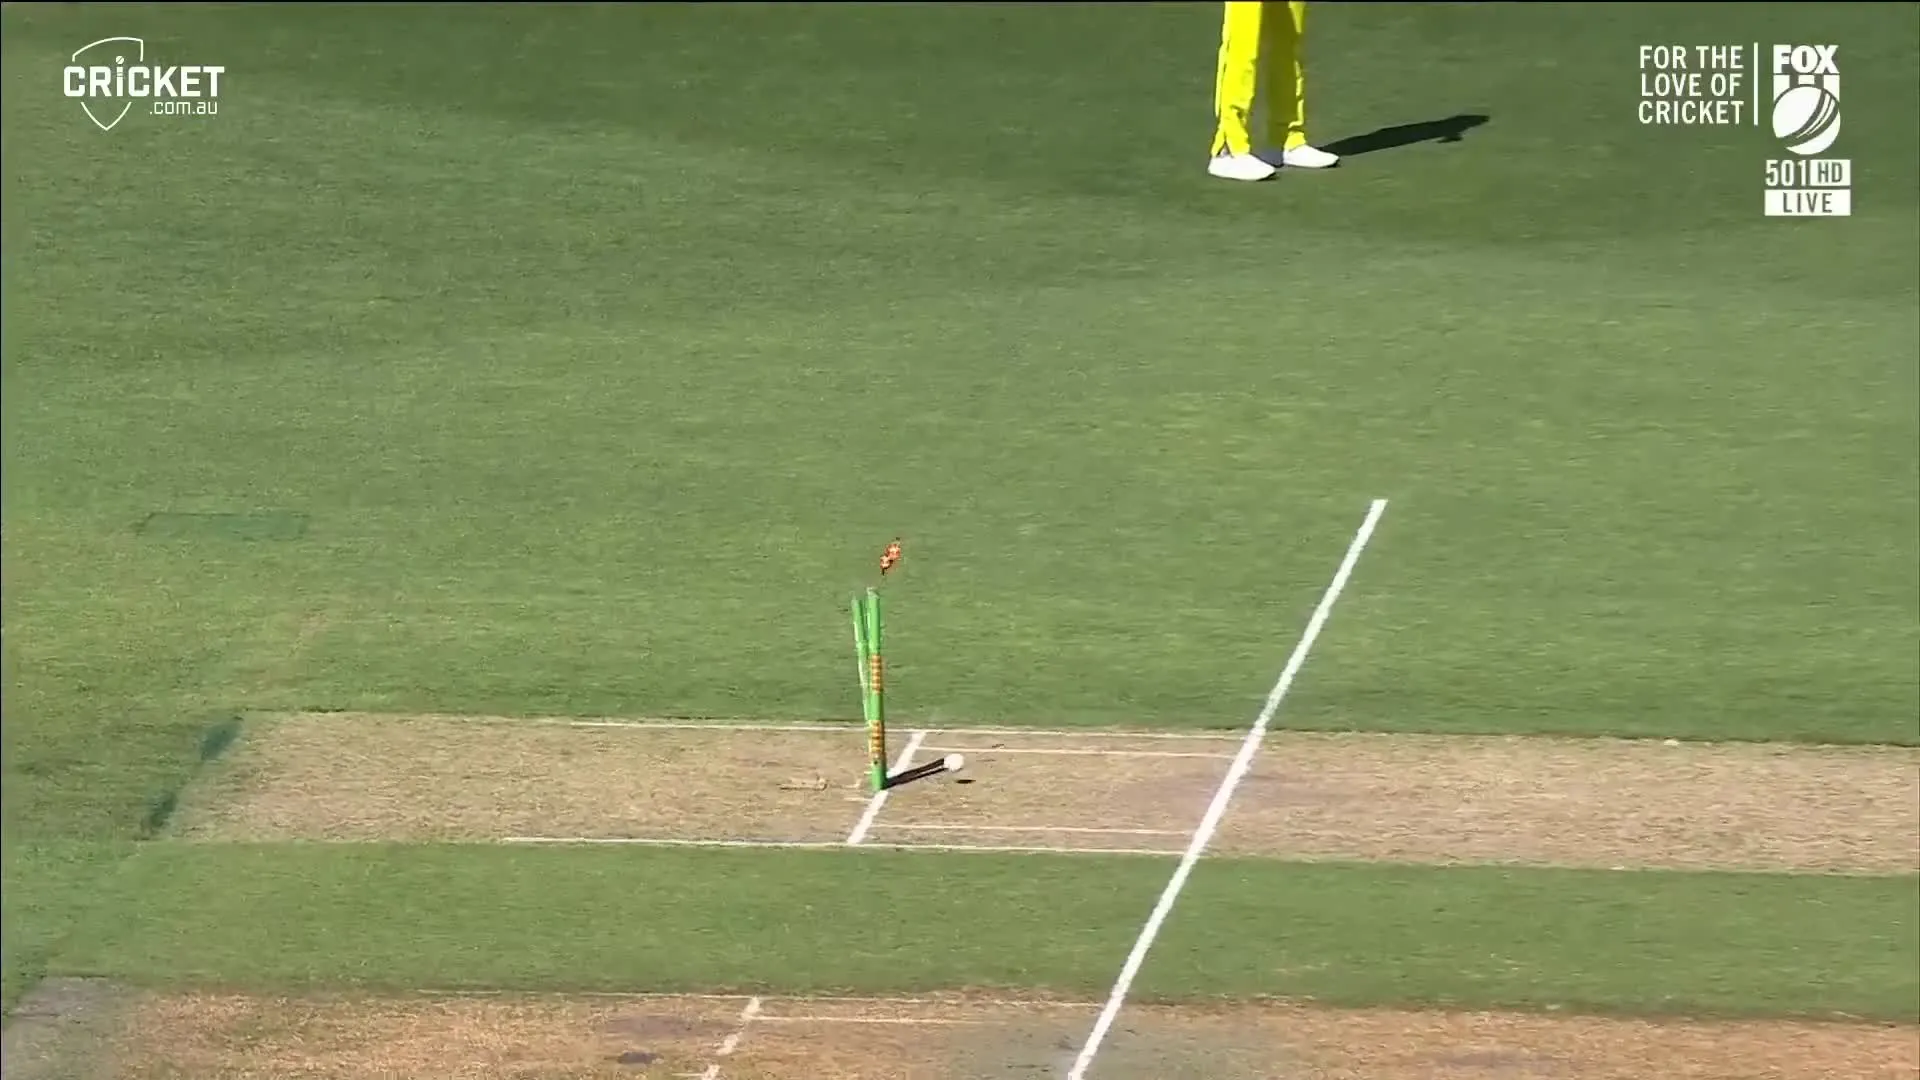 AUS vs ENG | Twitter draws Ricky Ponting comparisons after Ashton Agar's rocket throw to run out Liam Dawson